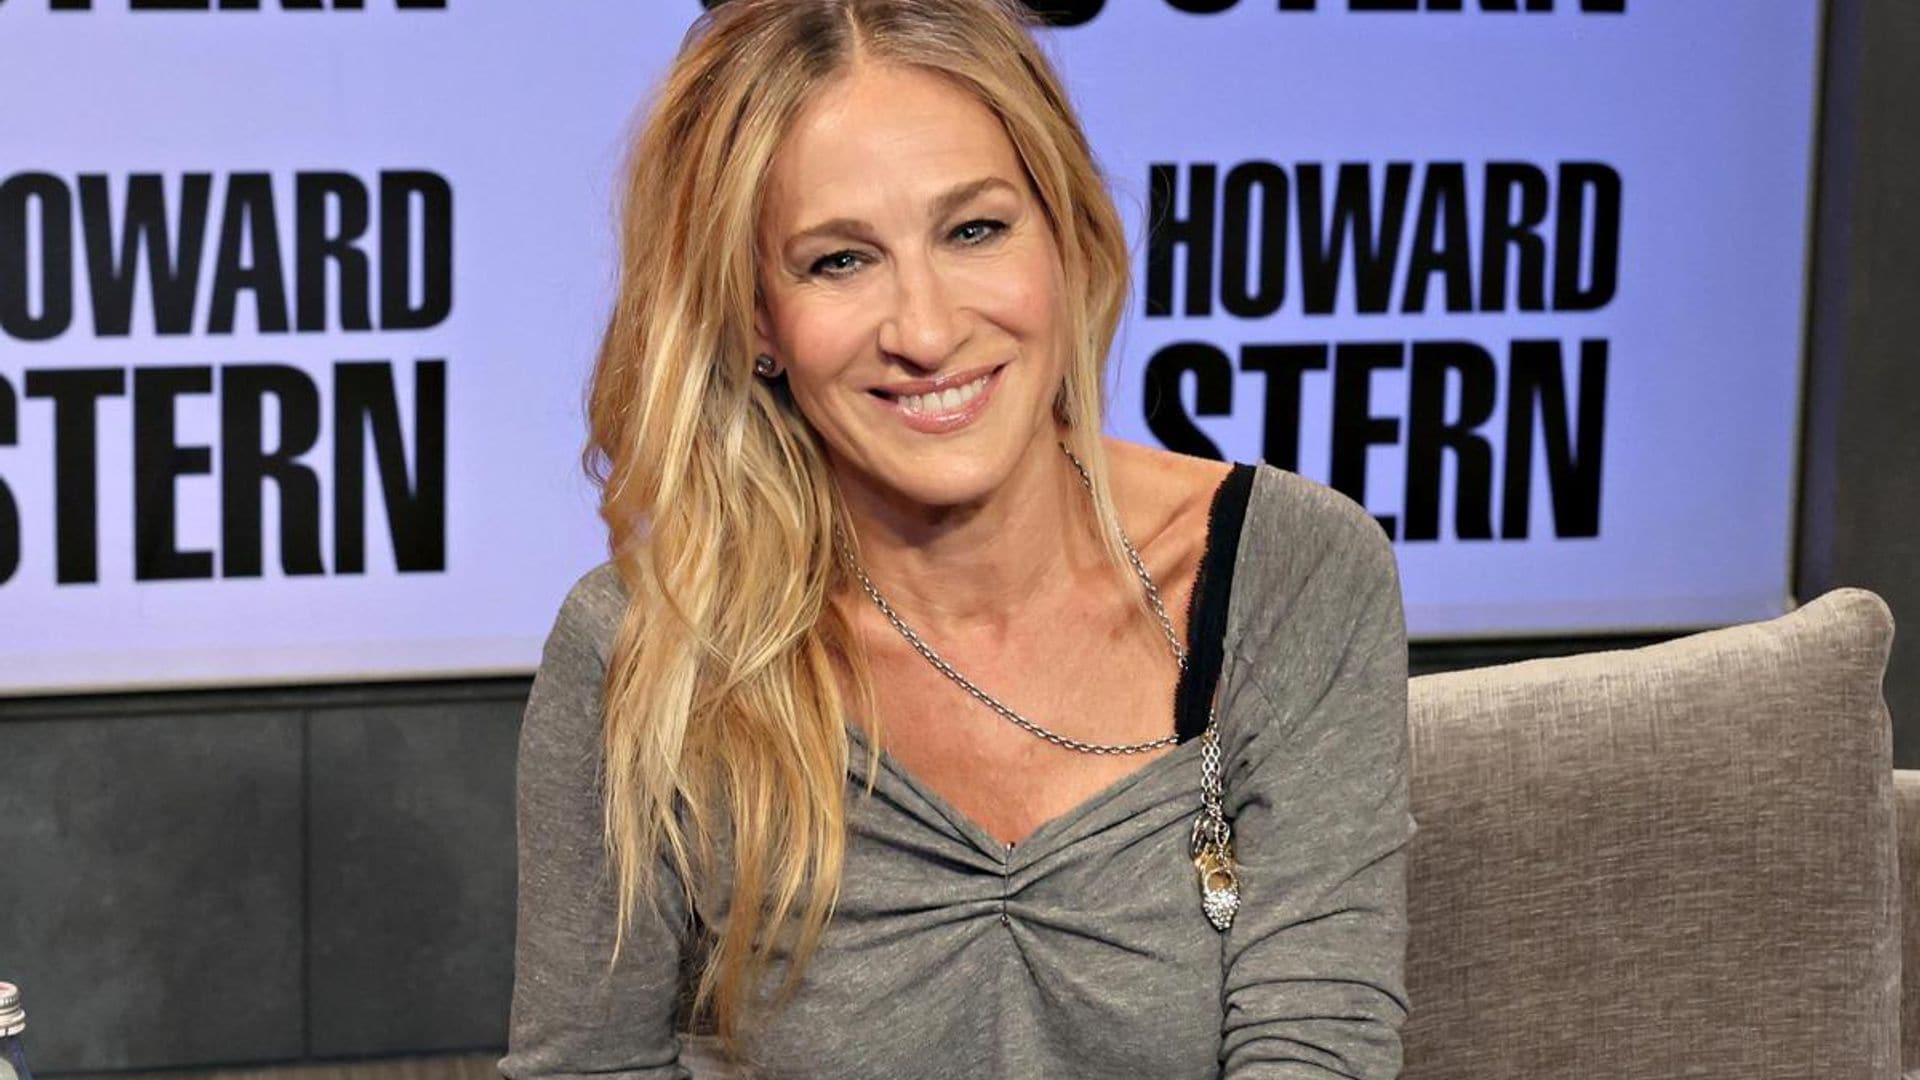 Sarah Jessica Parker shares thoughts on plastic surgery: ‘I missed out’